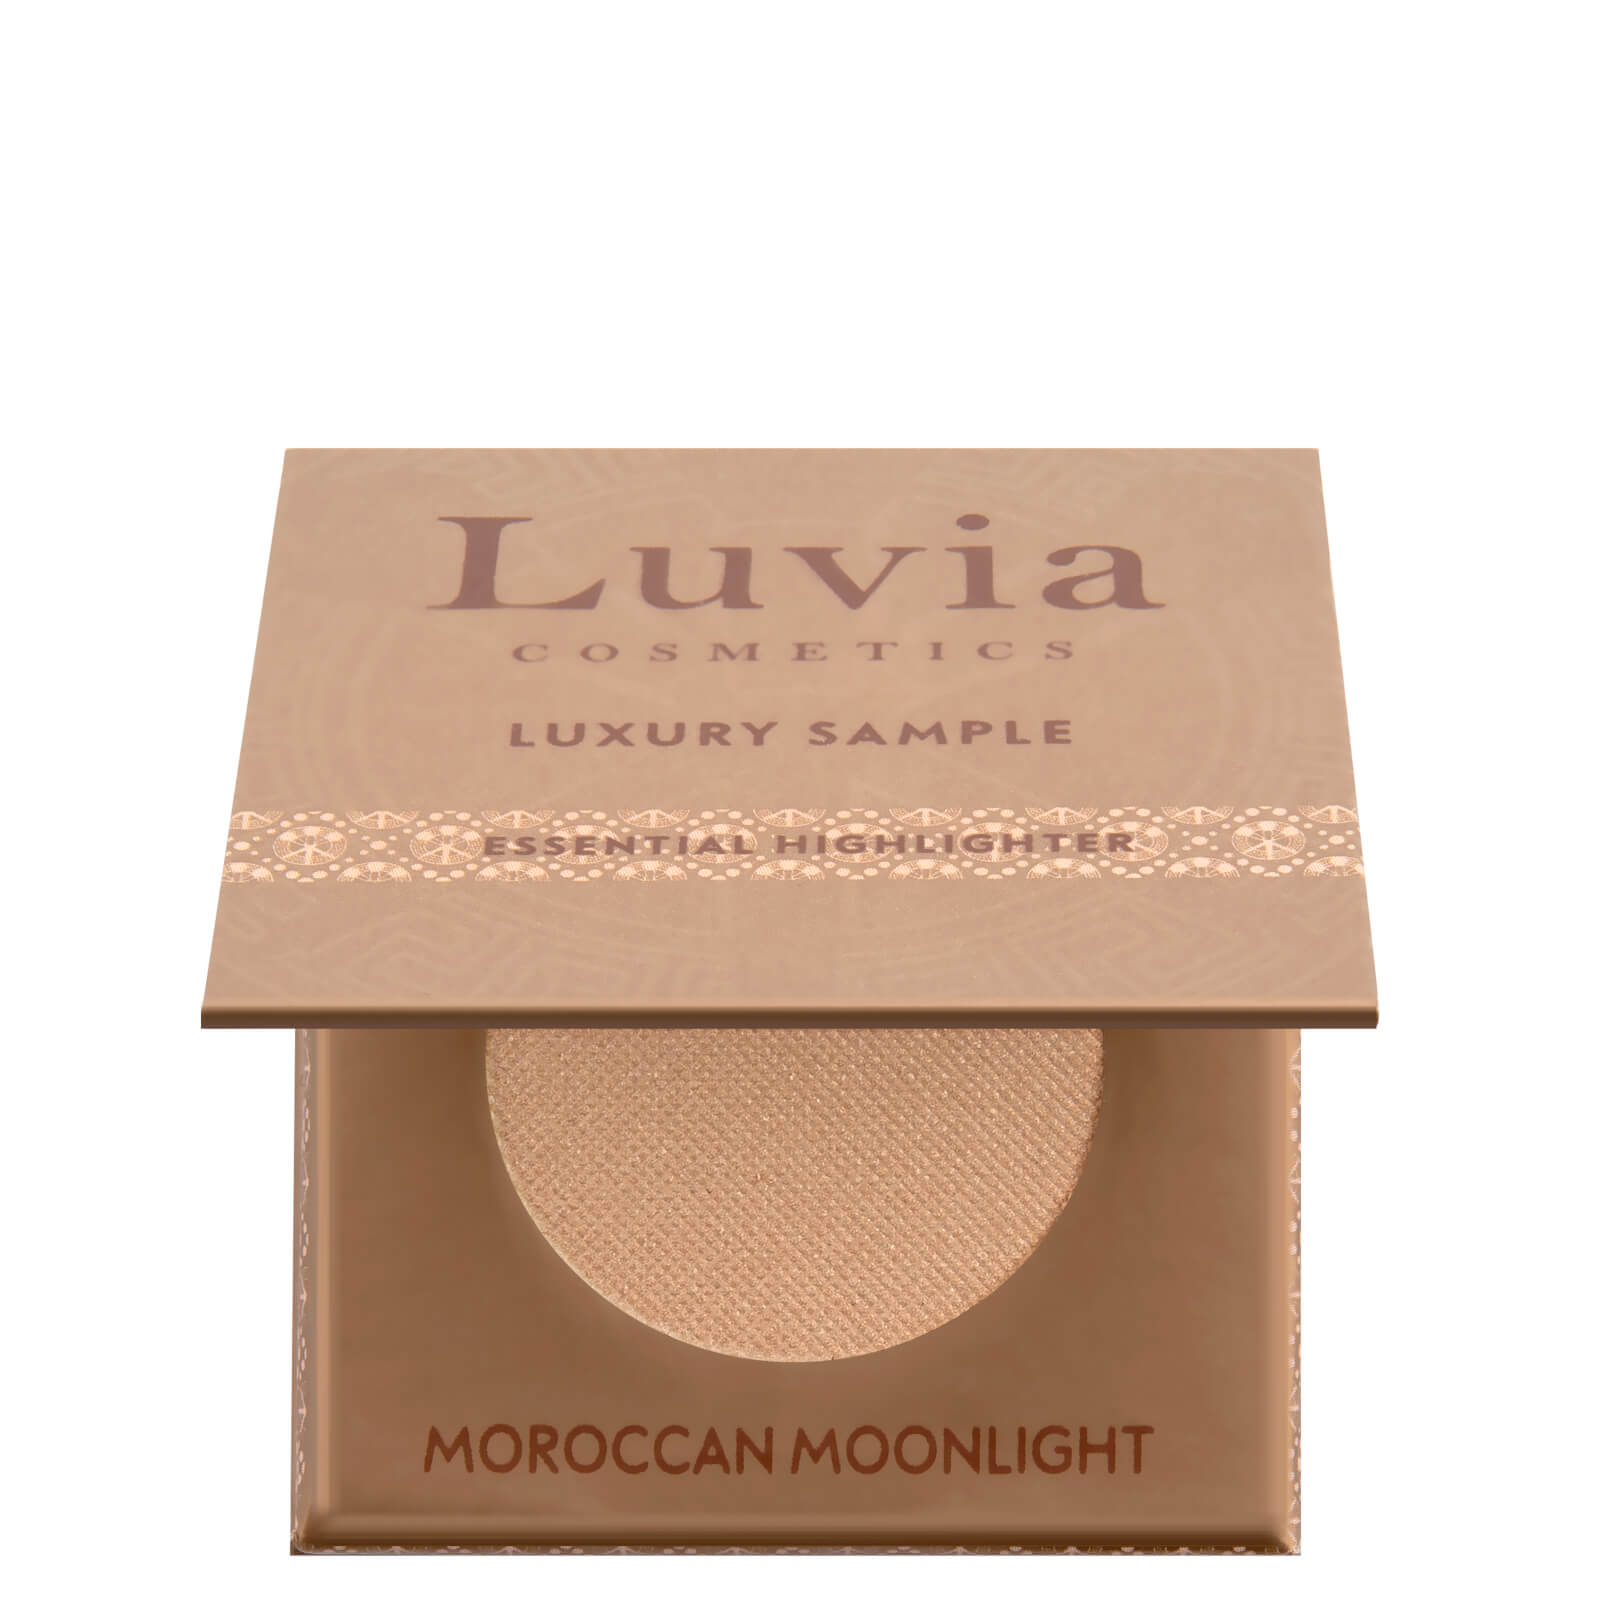 Luvia Prime Glow Highlighter - Moroccan Moonlight